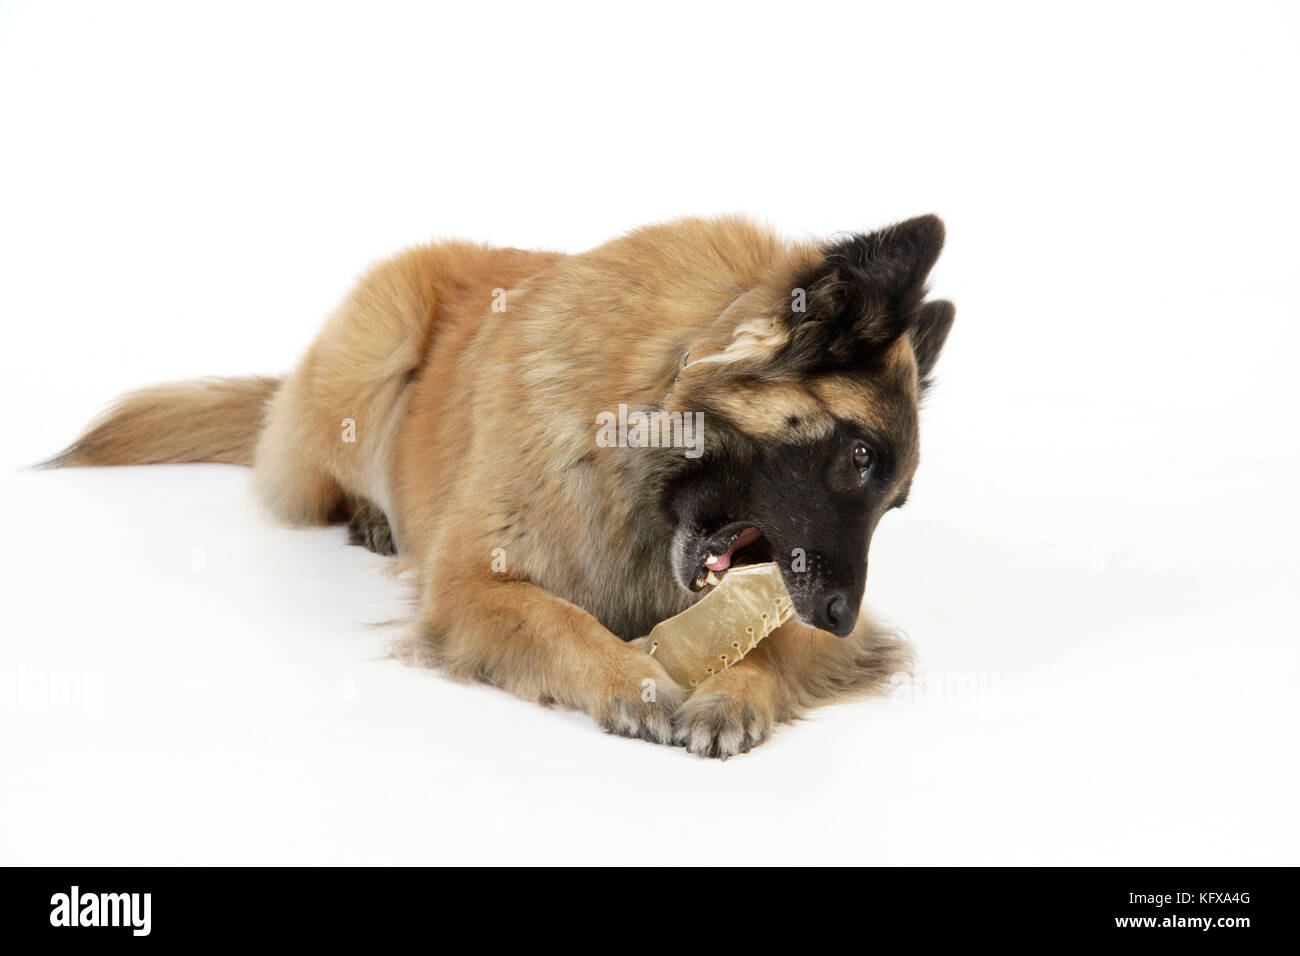 Dog chewing on a toy Stock Photo